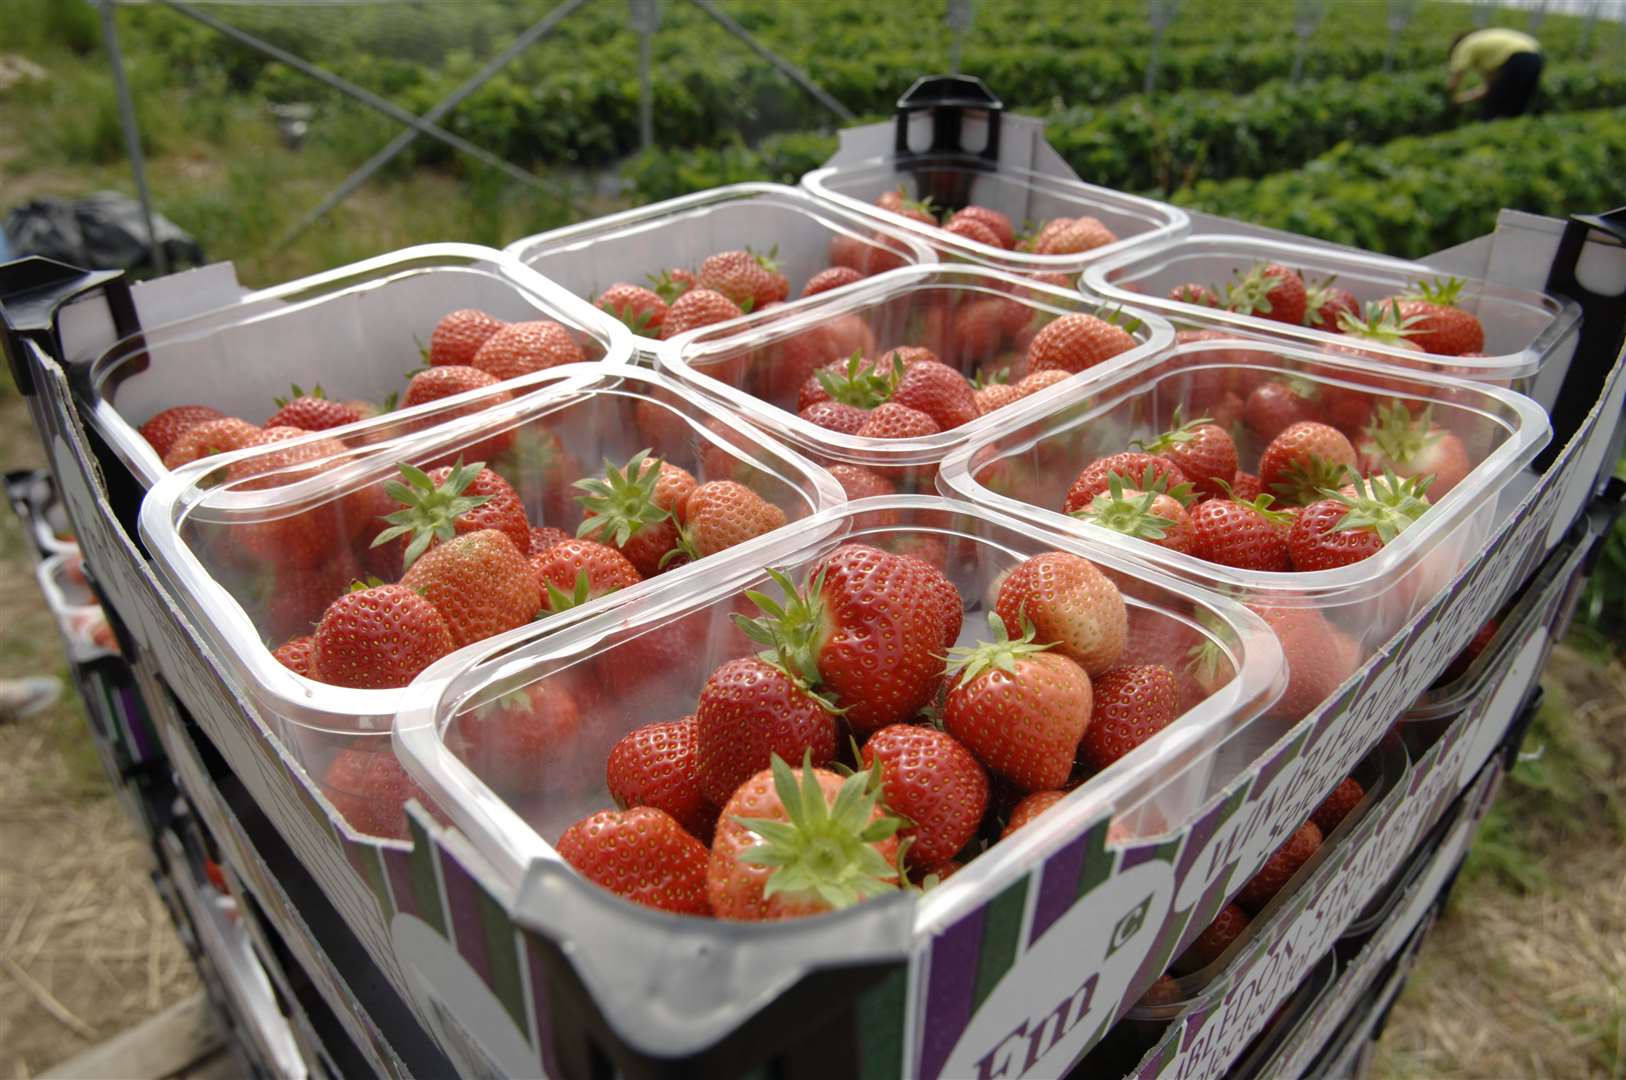 The strawberries were donated by Hugh Lowe Farms, which usually supplies Wimbledon in the summer